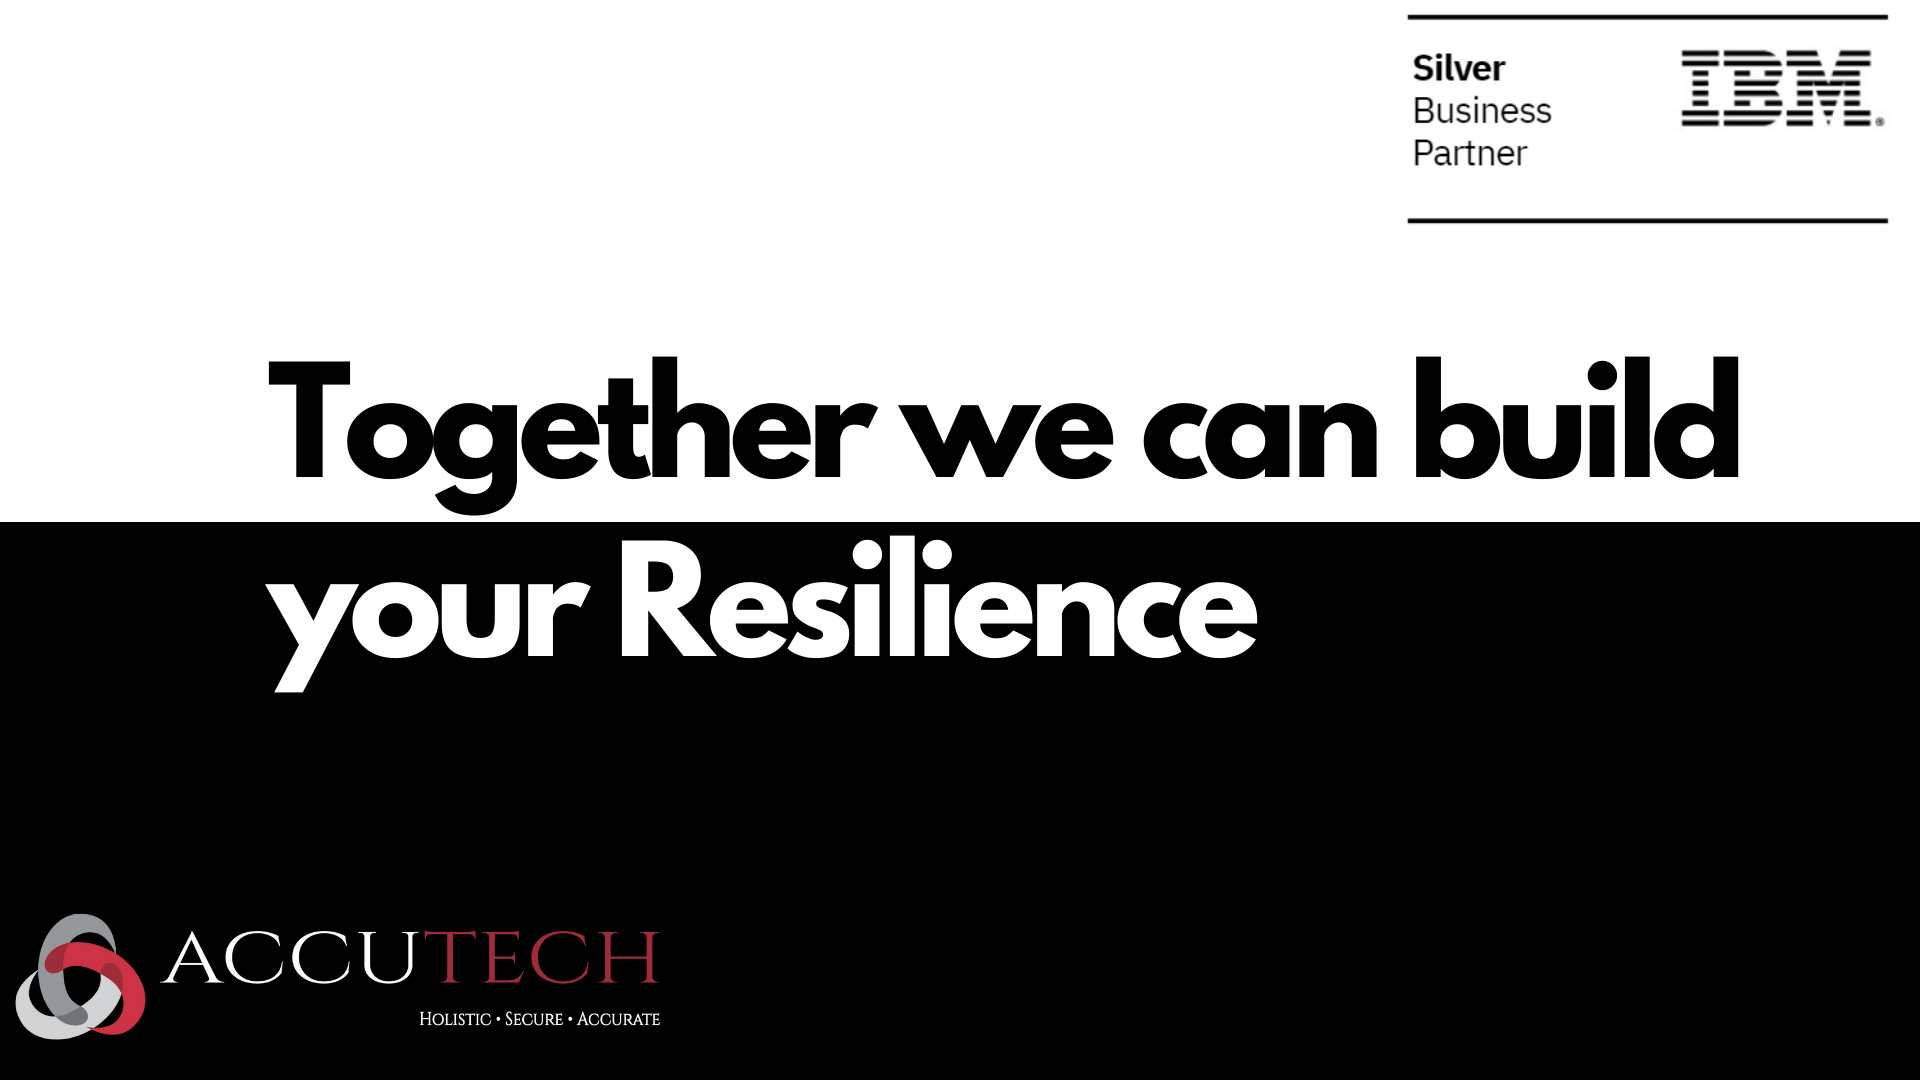 Data Resilience in the New Digital Era – Accutech as a Silver Business Partner of IBM